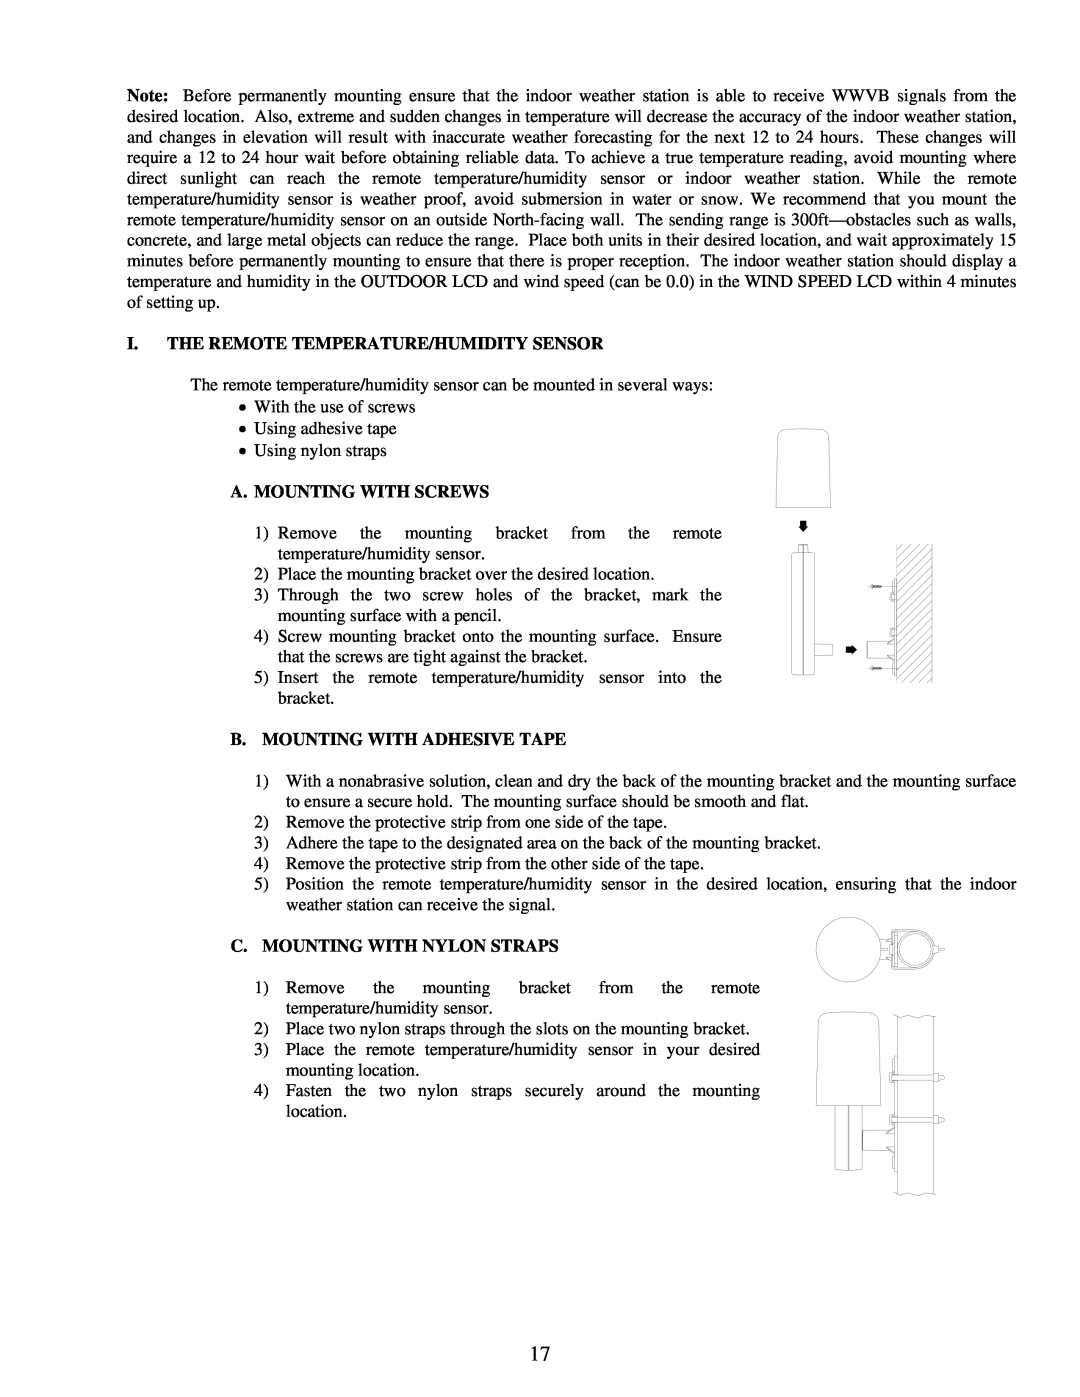 La Crosse Technology WS-7395U instruction manual I.The Remote Temperature/Humidity Sensor, A. Mounting With Screws 